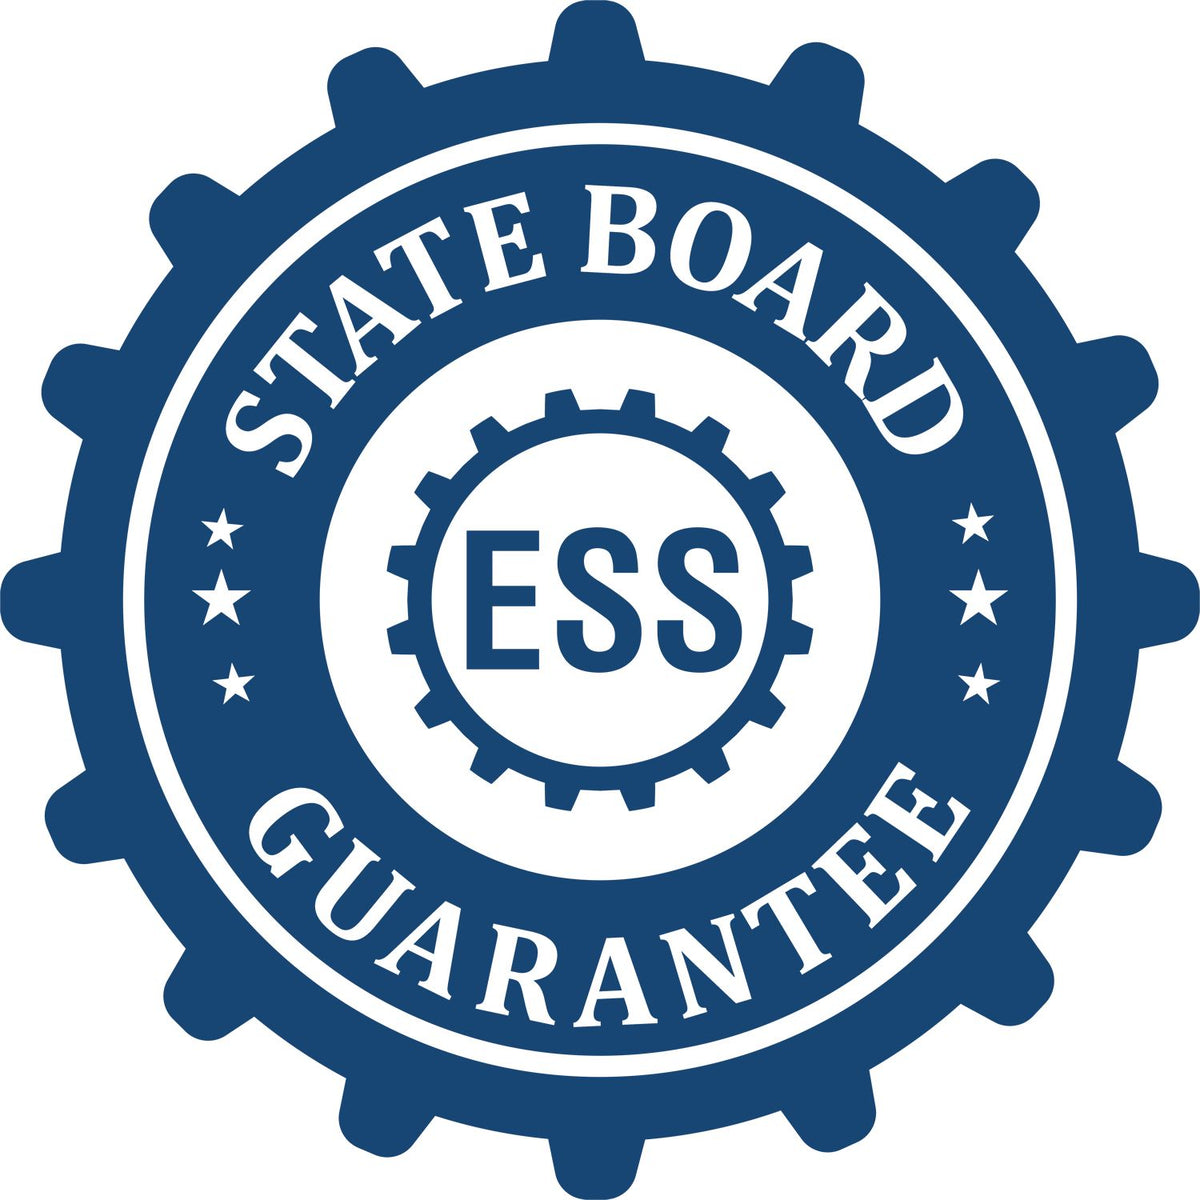 An emblem in a gear shape illustrating a state board guarantee for the Maryland Engineer Desk Seal product.